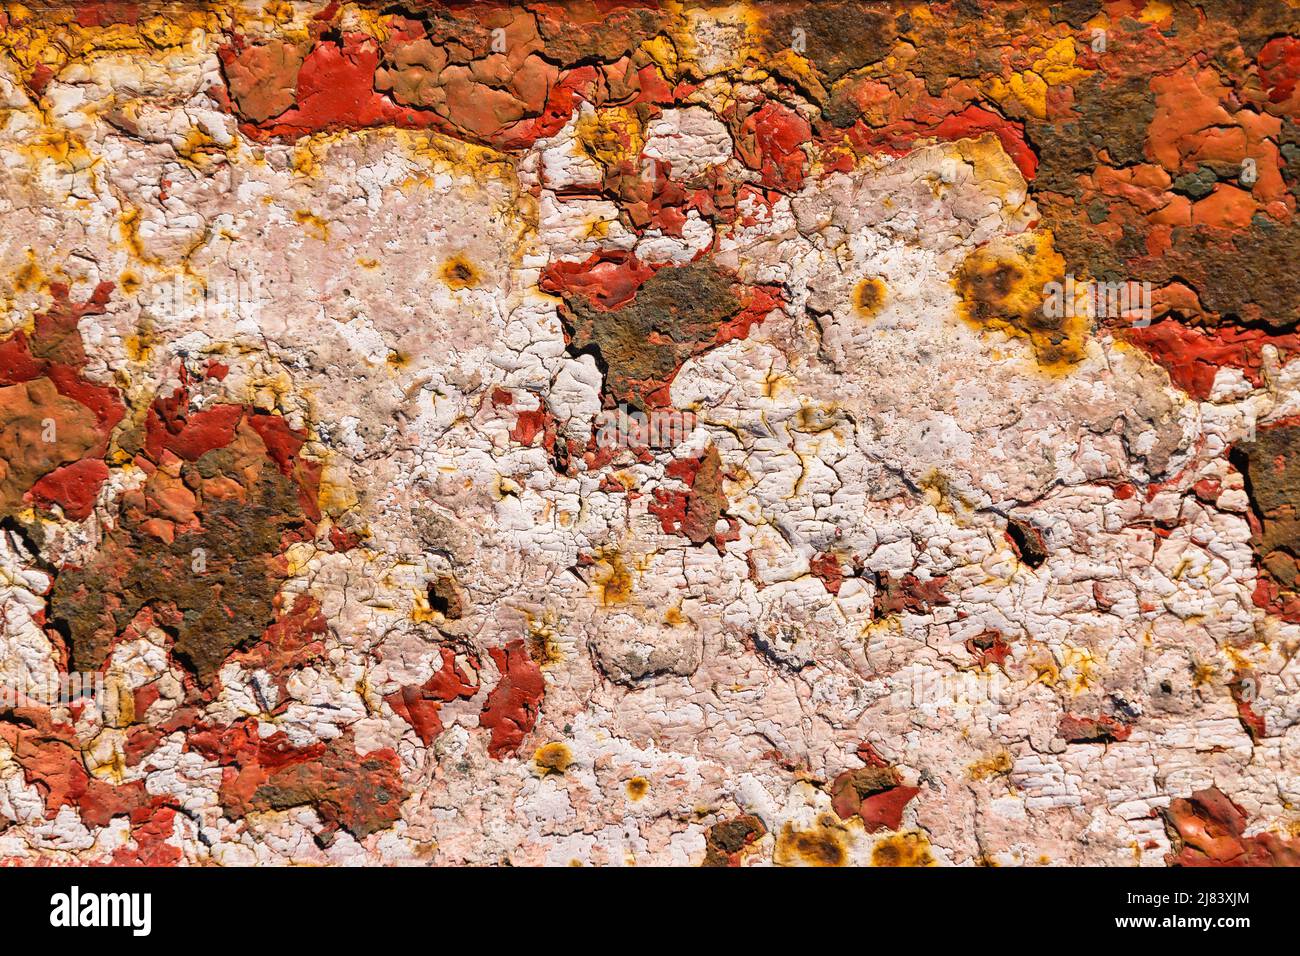 Grunge background with corrosion and deep crack on the texture of the surface Stock Photo